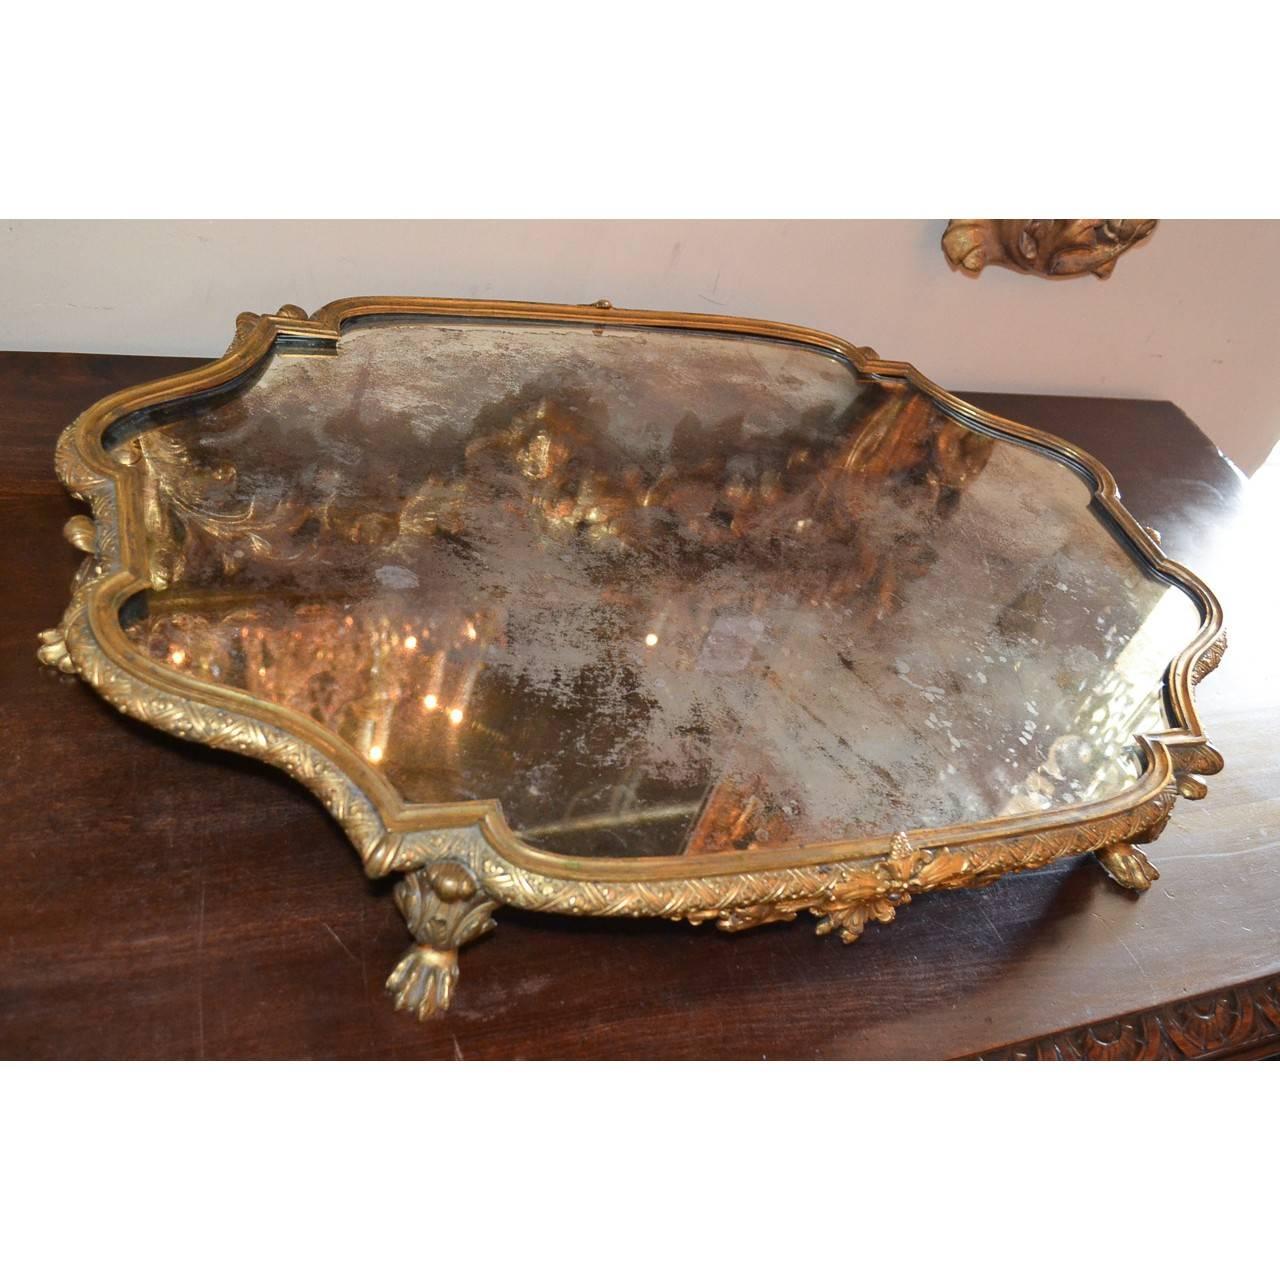 Beautiful gilt bronze and mirrored tray/platter that was made in France, circa 1870.
Measure: The plateau is 27 inches wide x 18.5 inches deep x 3.5 inches in height.
Very nice condition. Mirror intact.